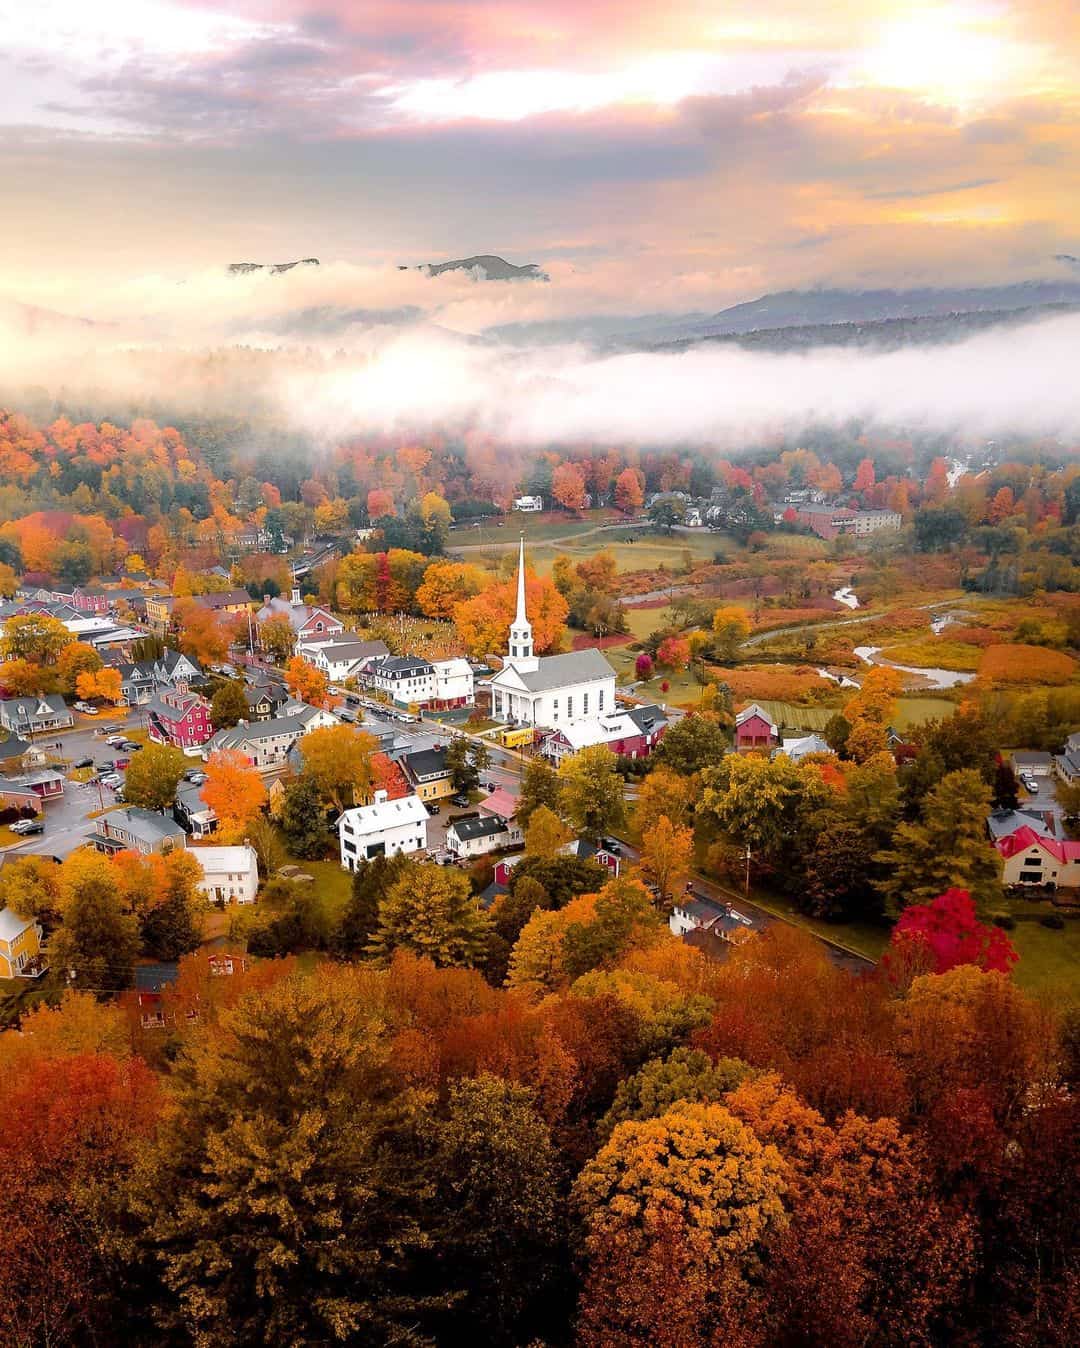 Will_Zimm_3:21:23 Stowe Vermont Arial Photo in Foliage